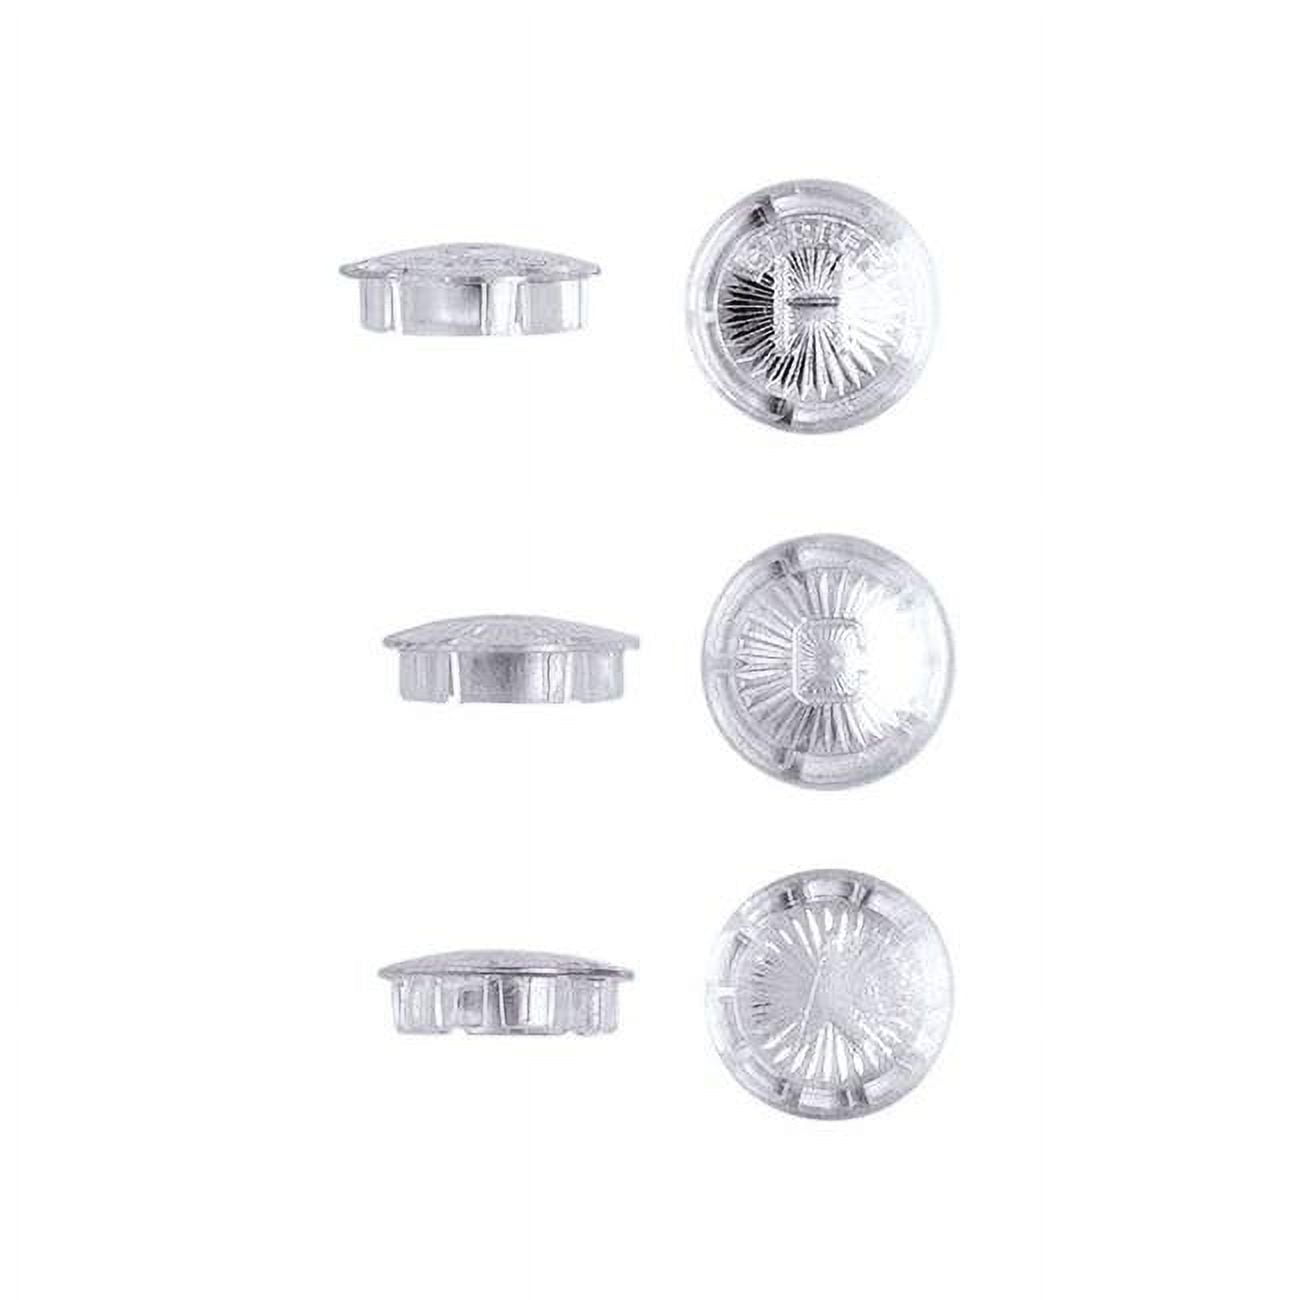 4935185 Acrylic Hot, Cold, Diverter Index Button - Case Of 3